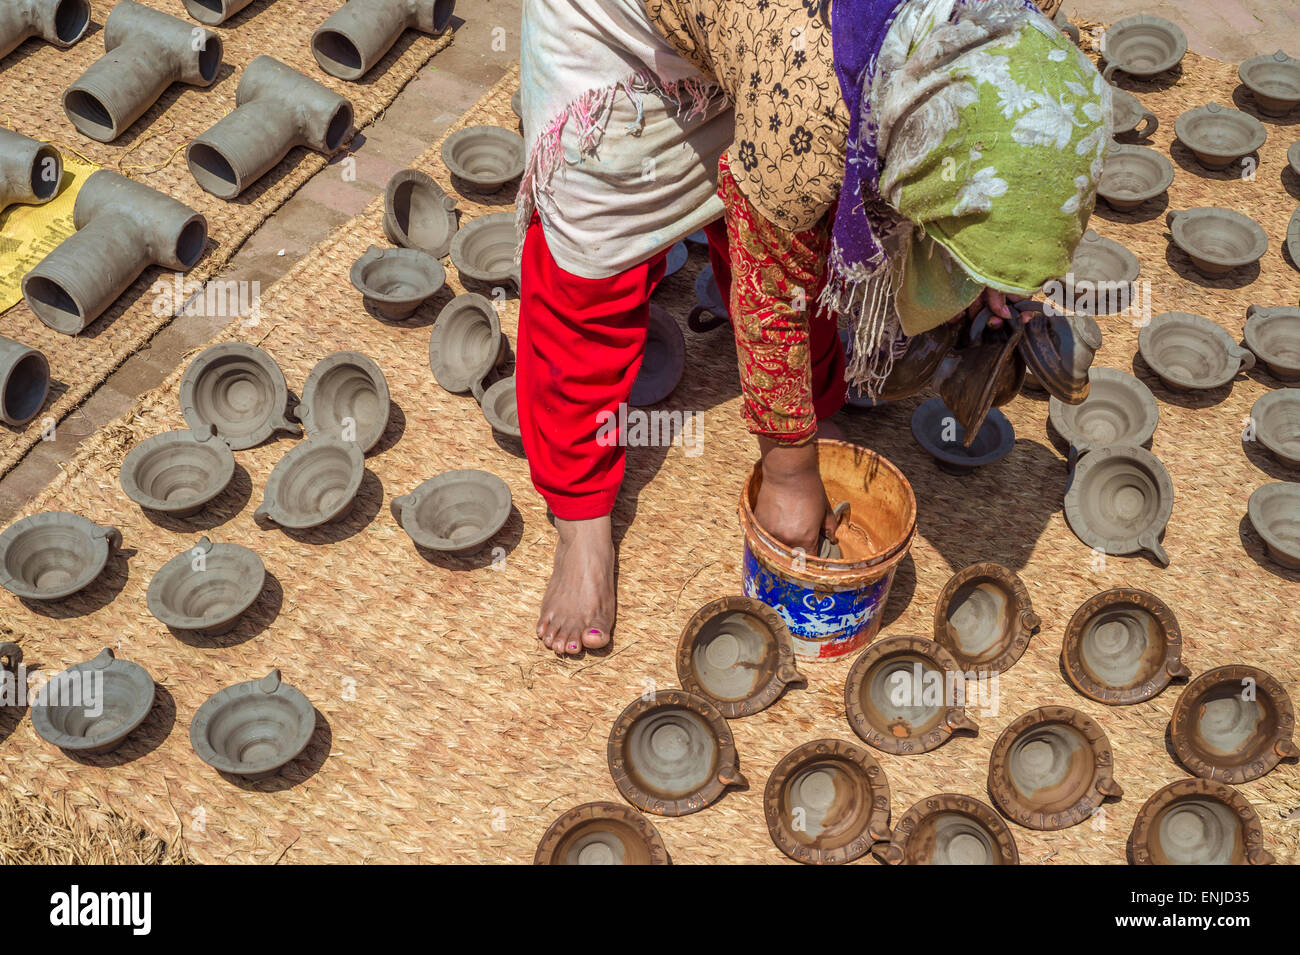 Bhaktapur, Nepal - 20 march 2015: Woman placing potteries to dry on Pottery Square. Stock Photo